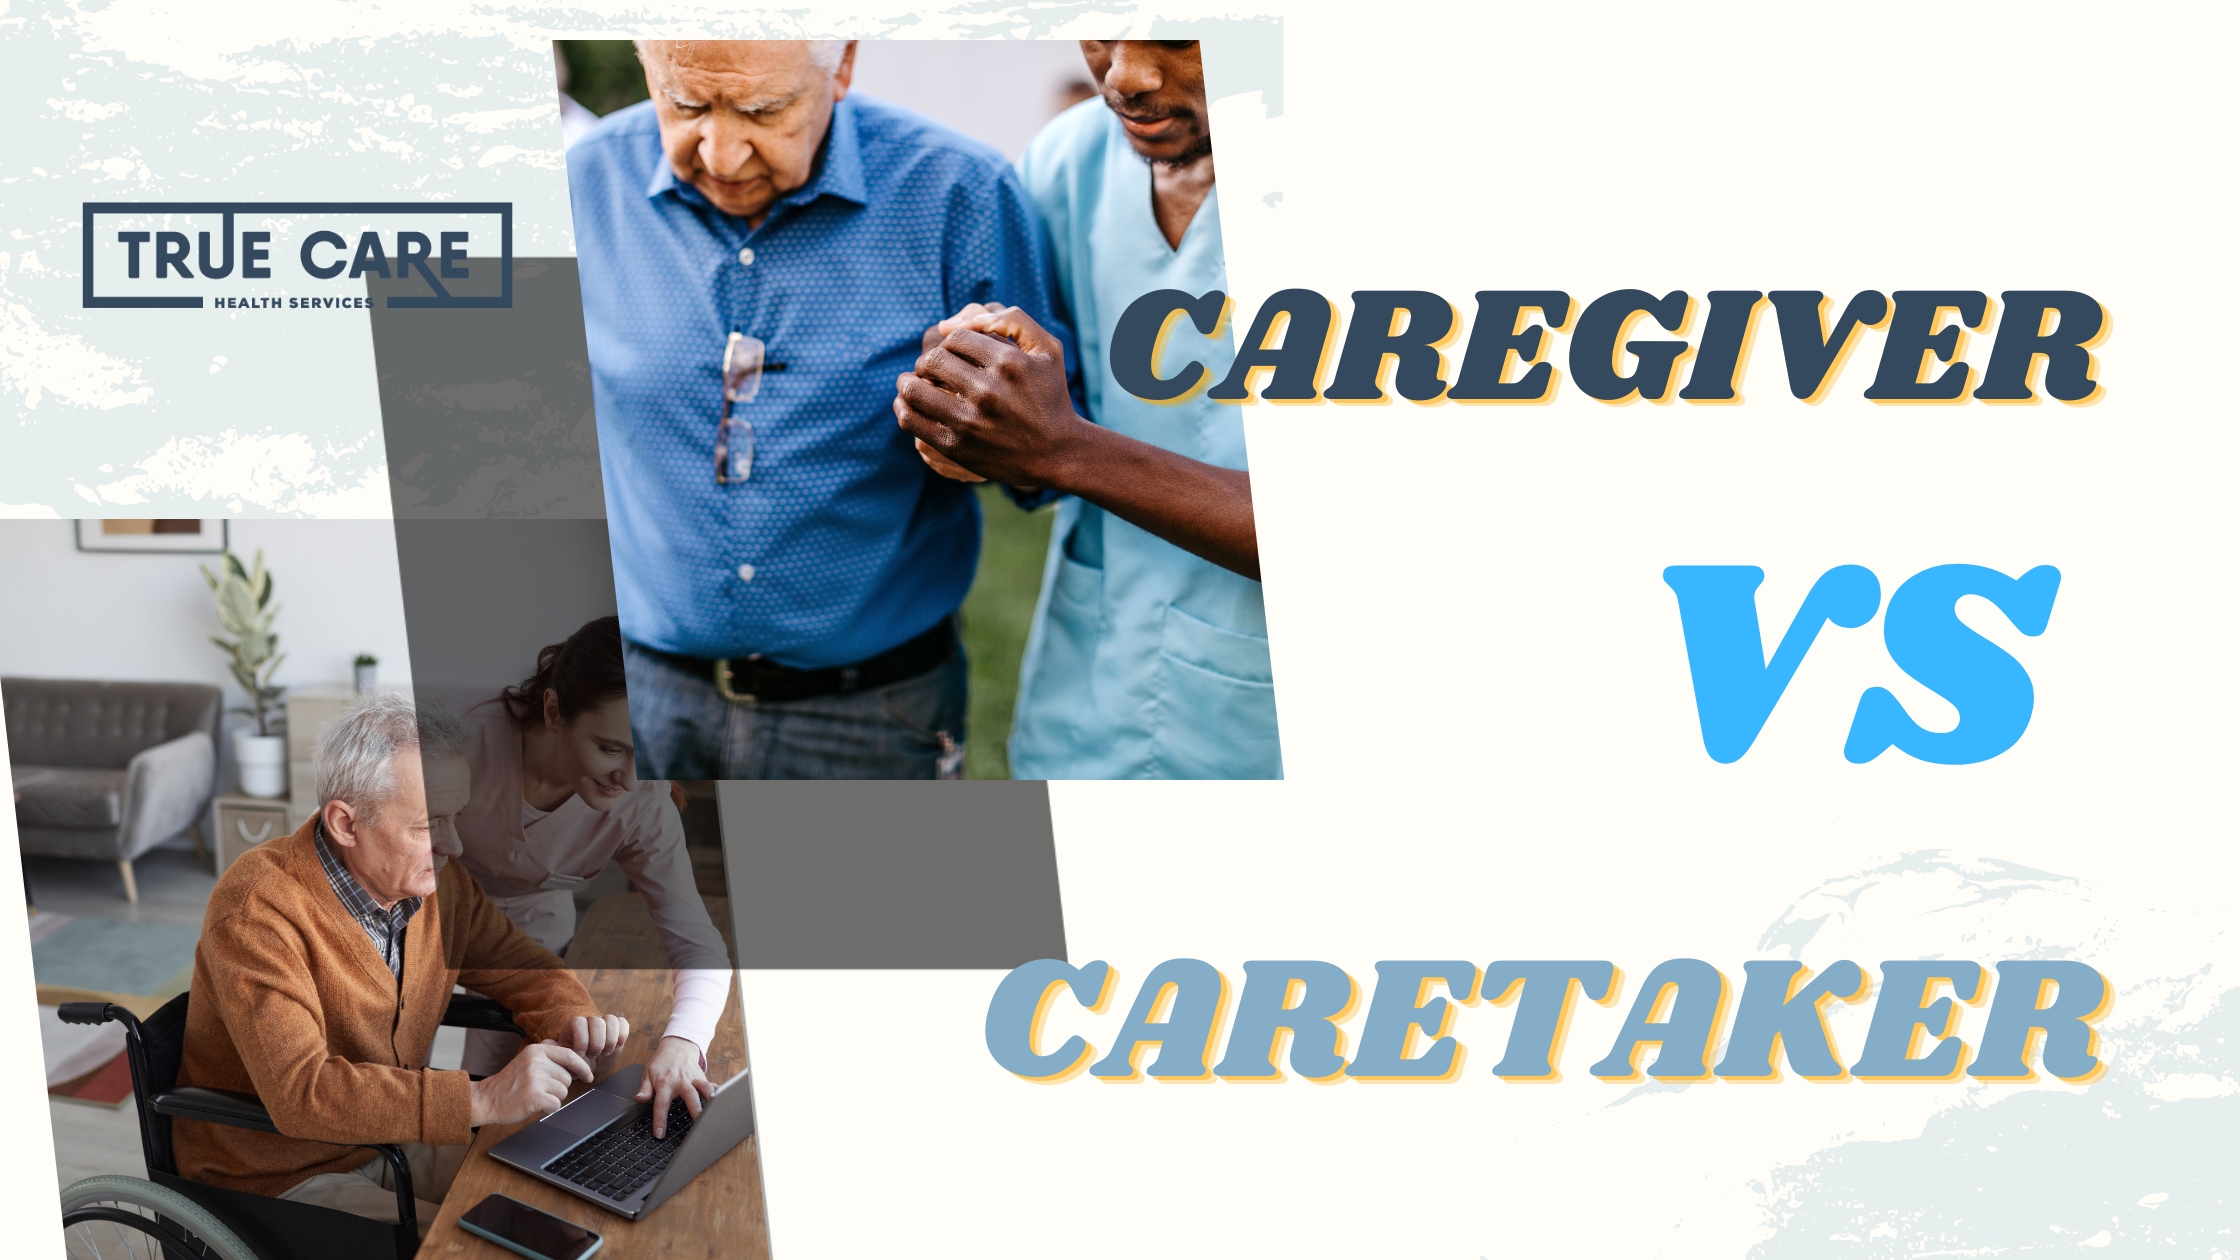 Understanding the Differences Between a Caretaker and a Caregiver